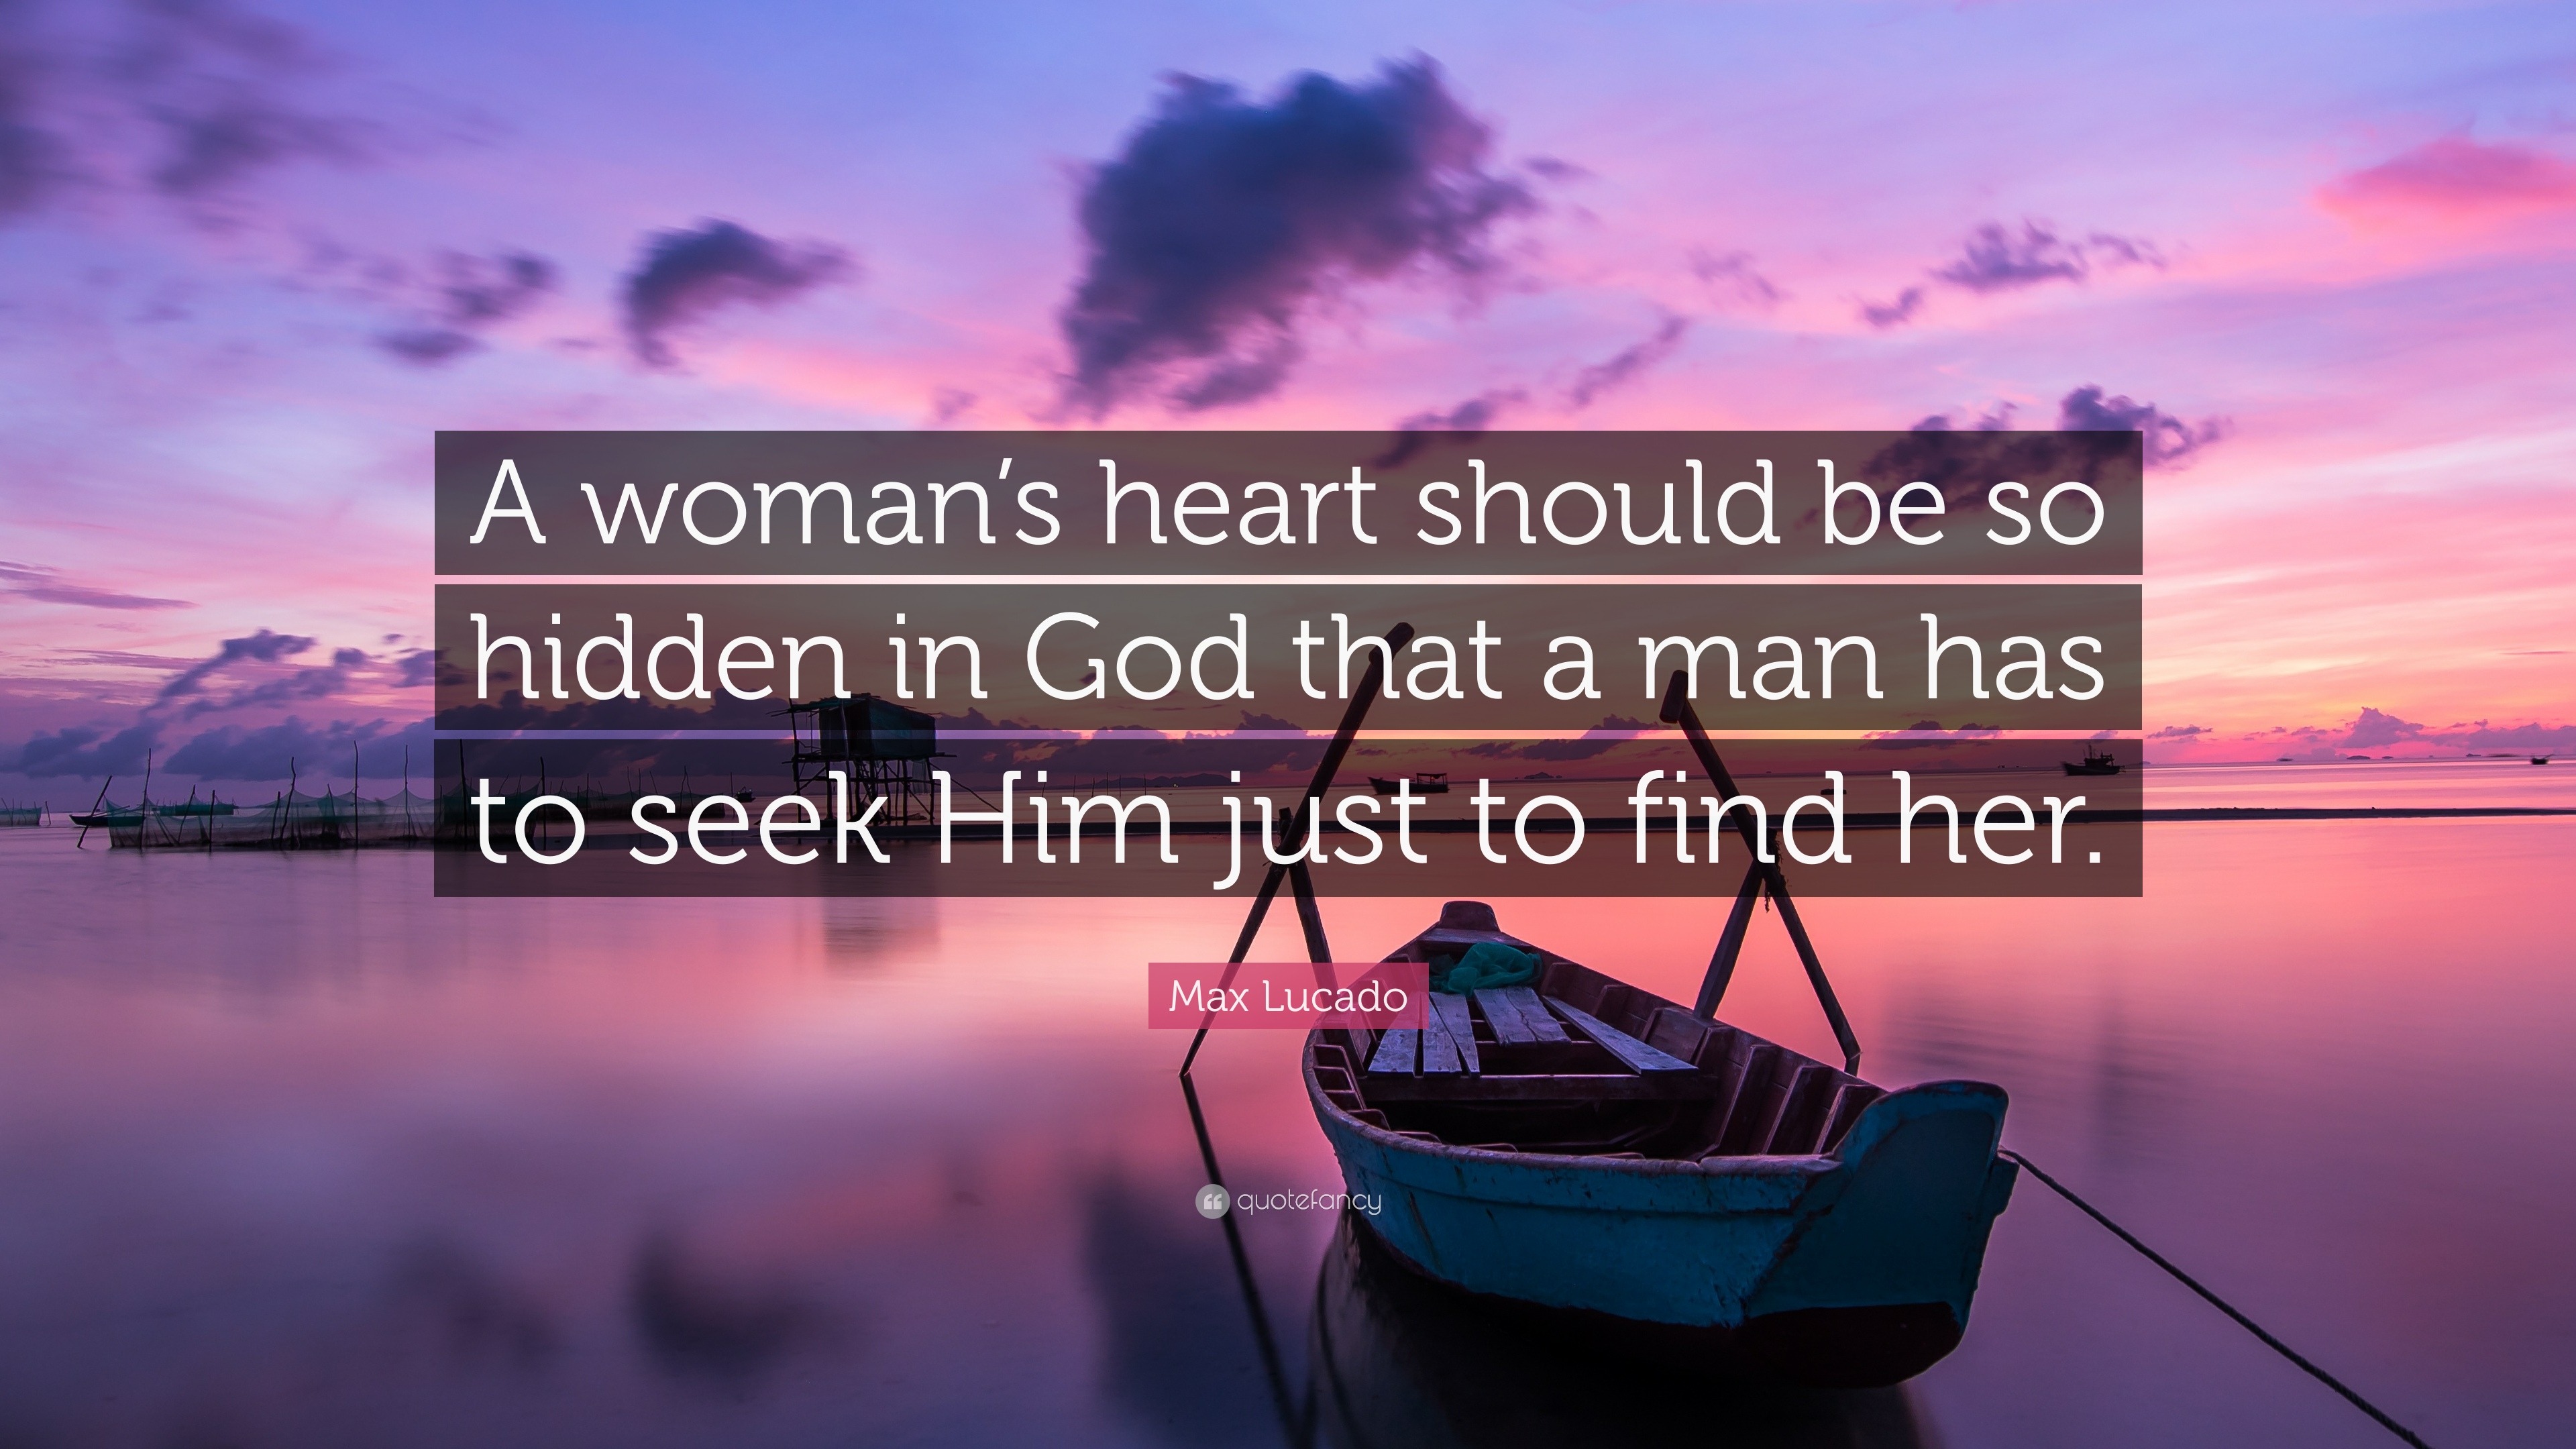 Max Lucado Quote: “A woman's heart should be so hidden in God that